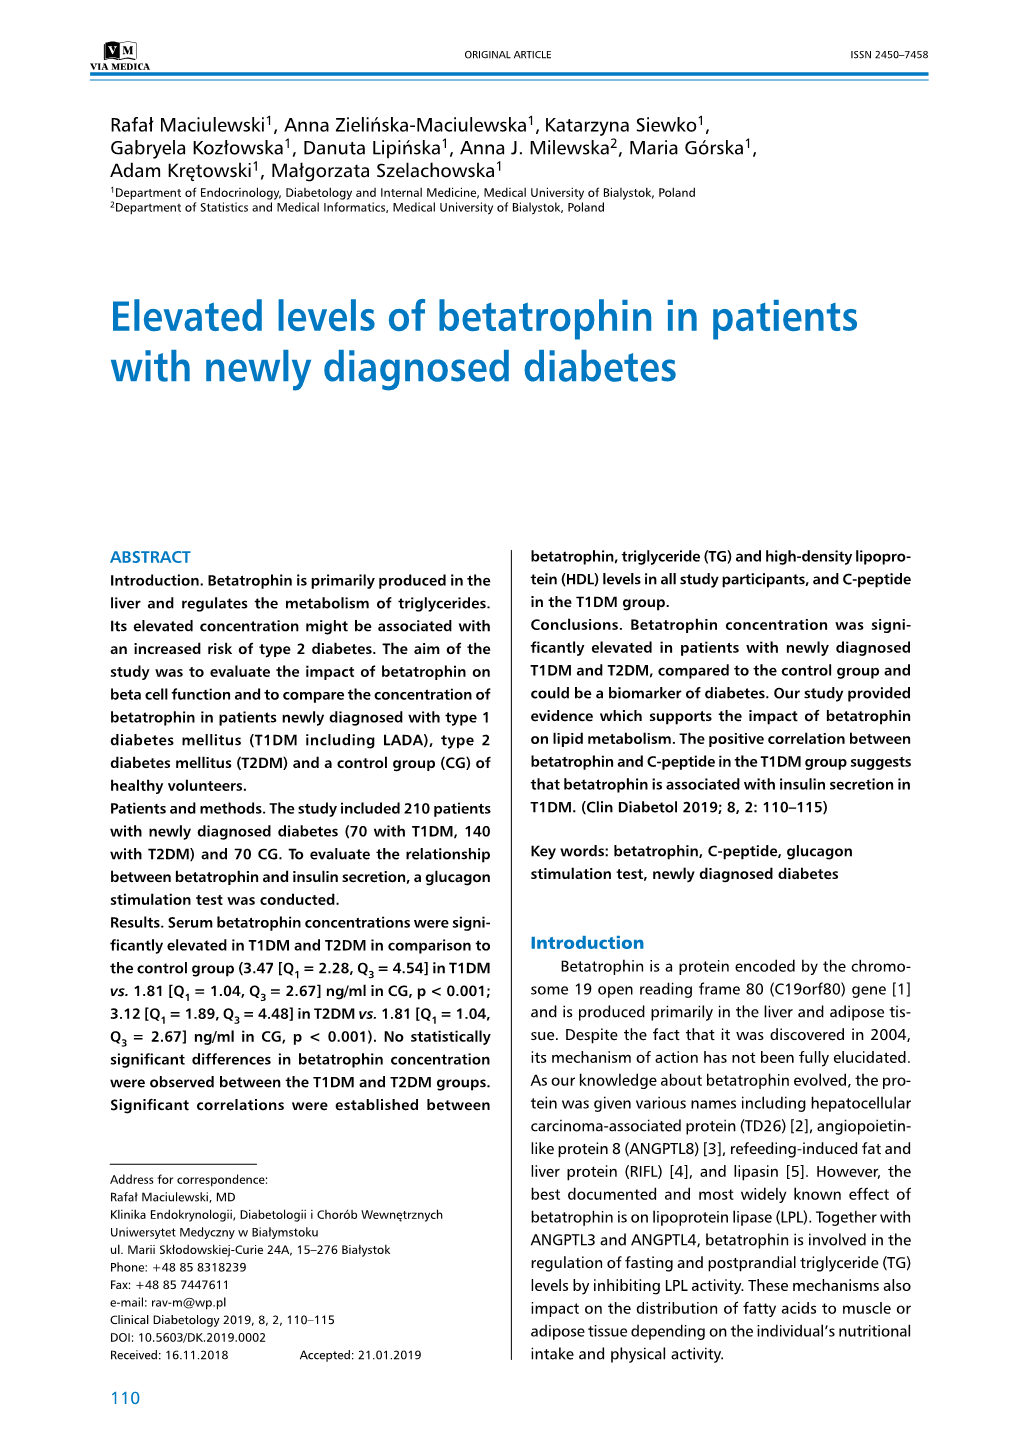 Elevated Levels of Betatrophin in Patients with Newly Diagnosed Diabetes